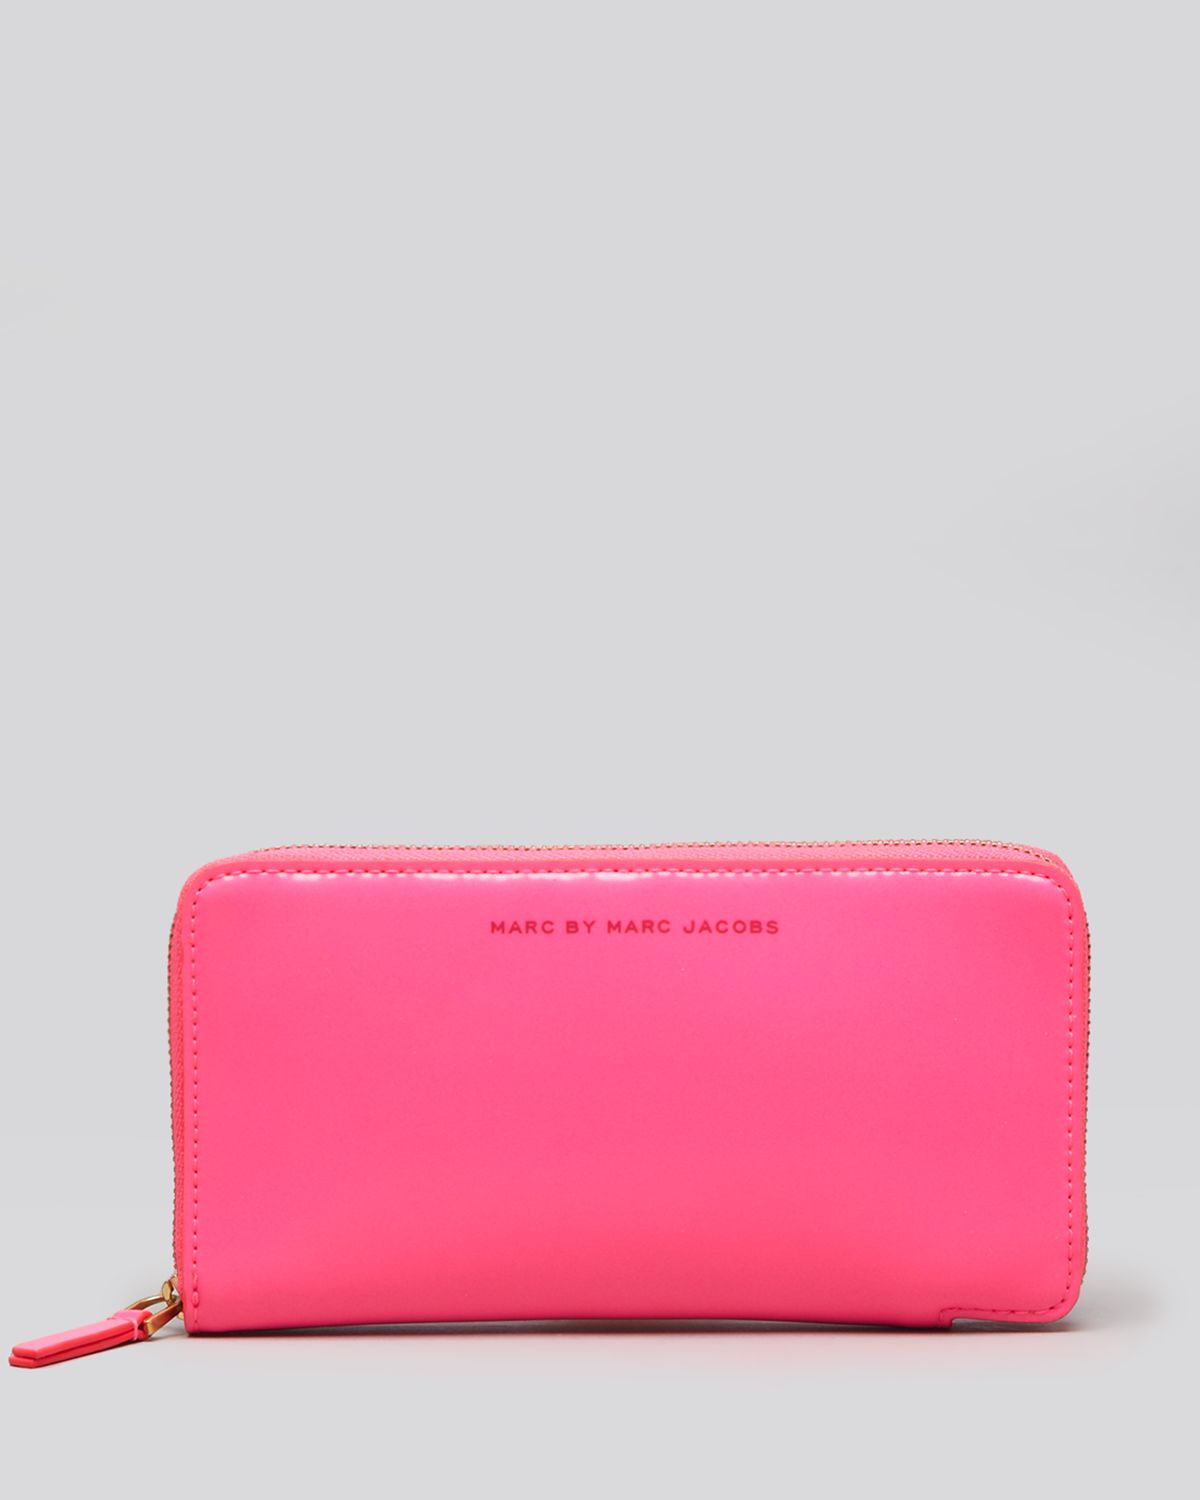 Marc By Marc Jacobs Wallet Its Back Medium Zip in Pink - Lyst